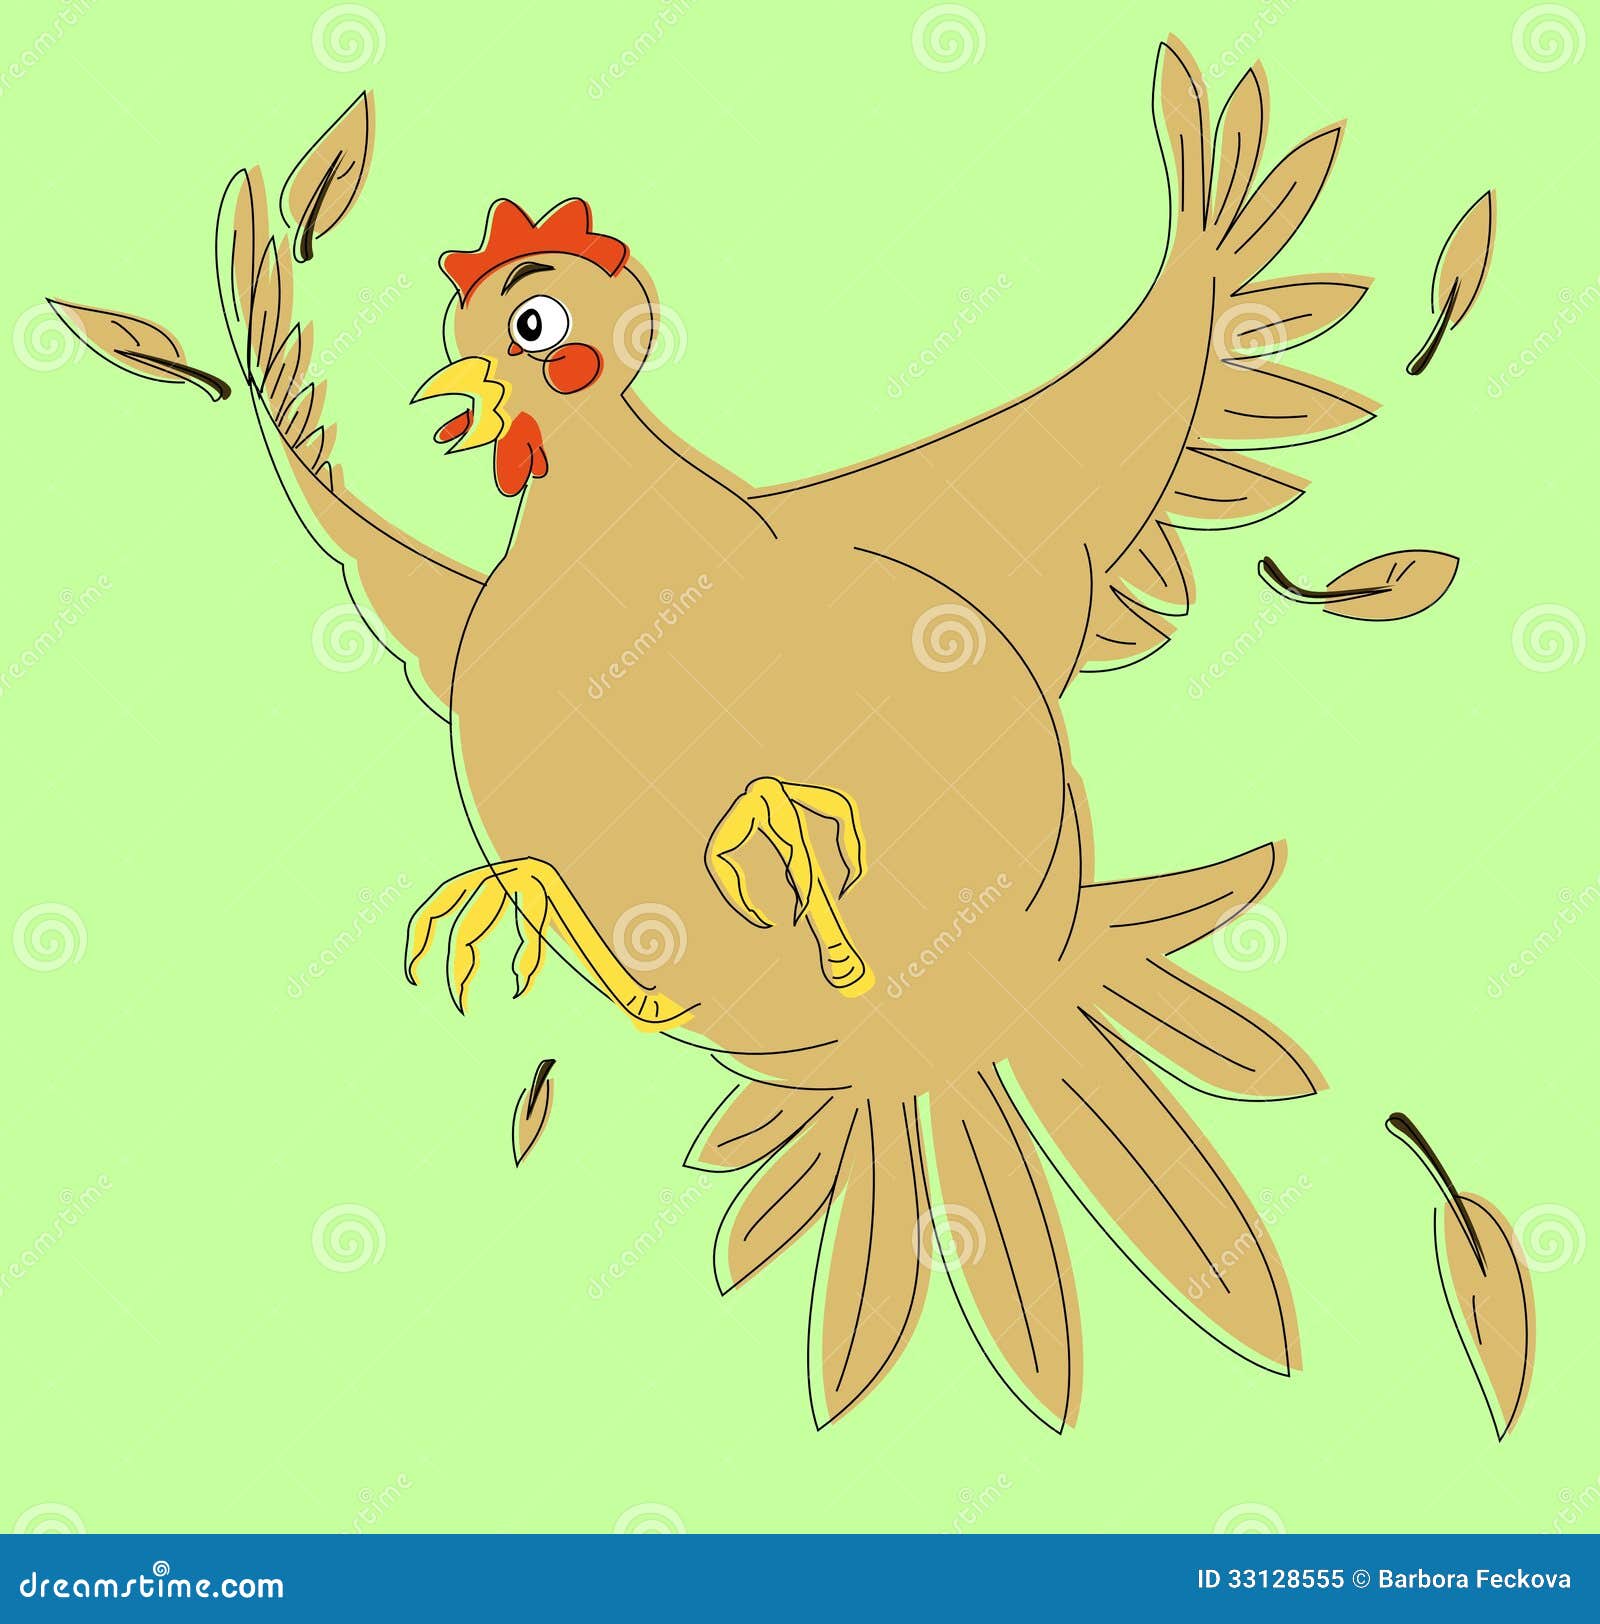 scared chicken clipart free - photo #35